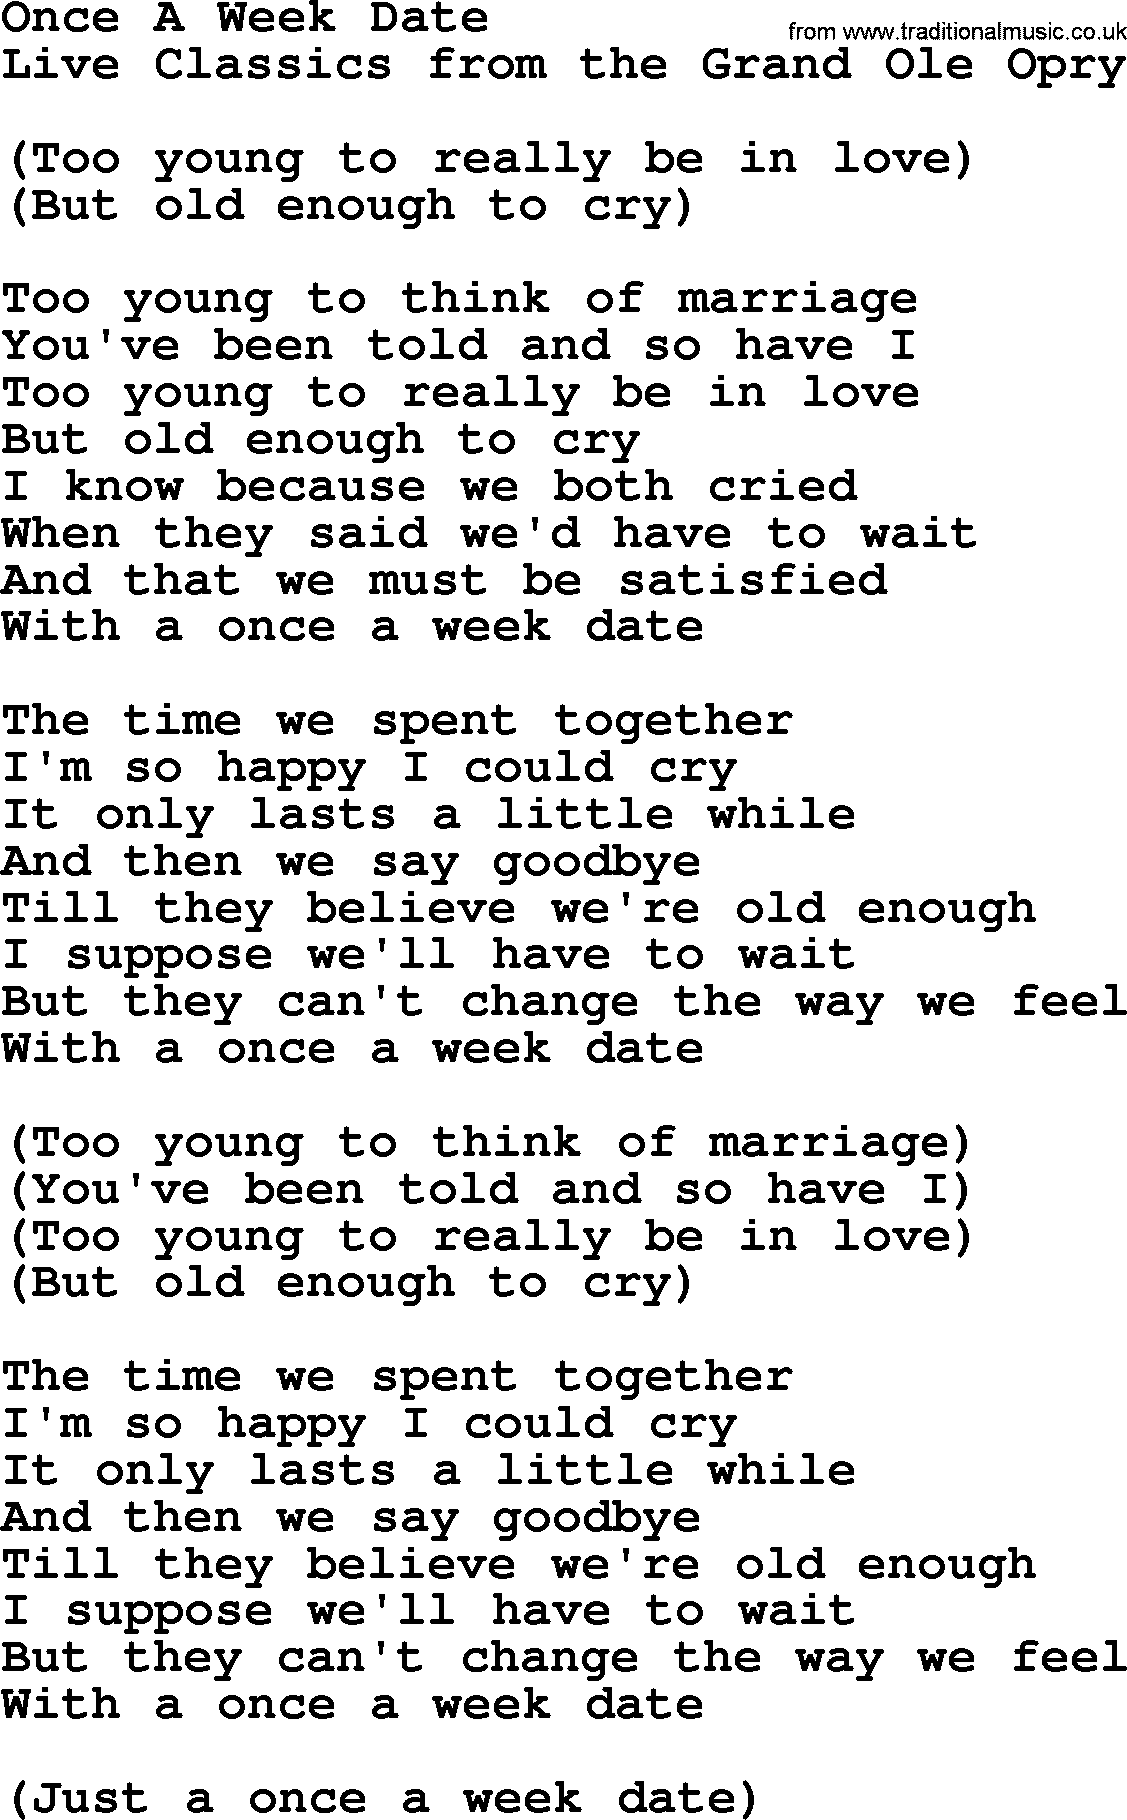 Marty Robbins song: Once A Week Date, lyrics